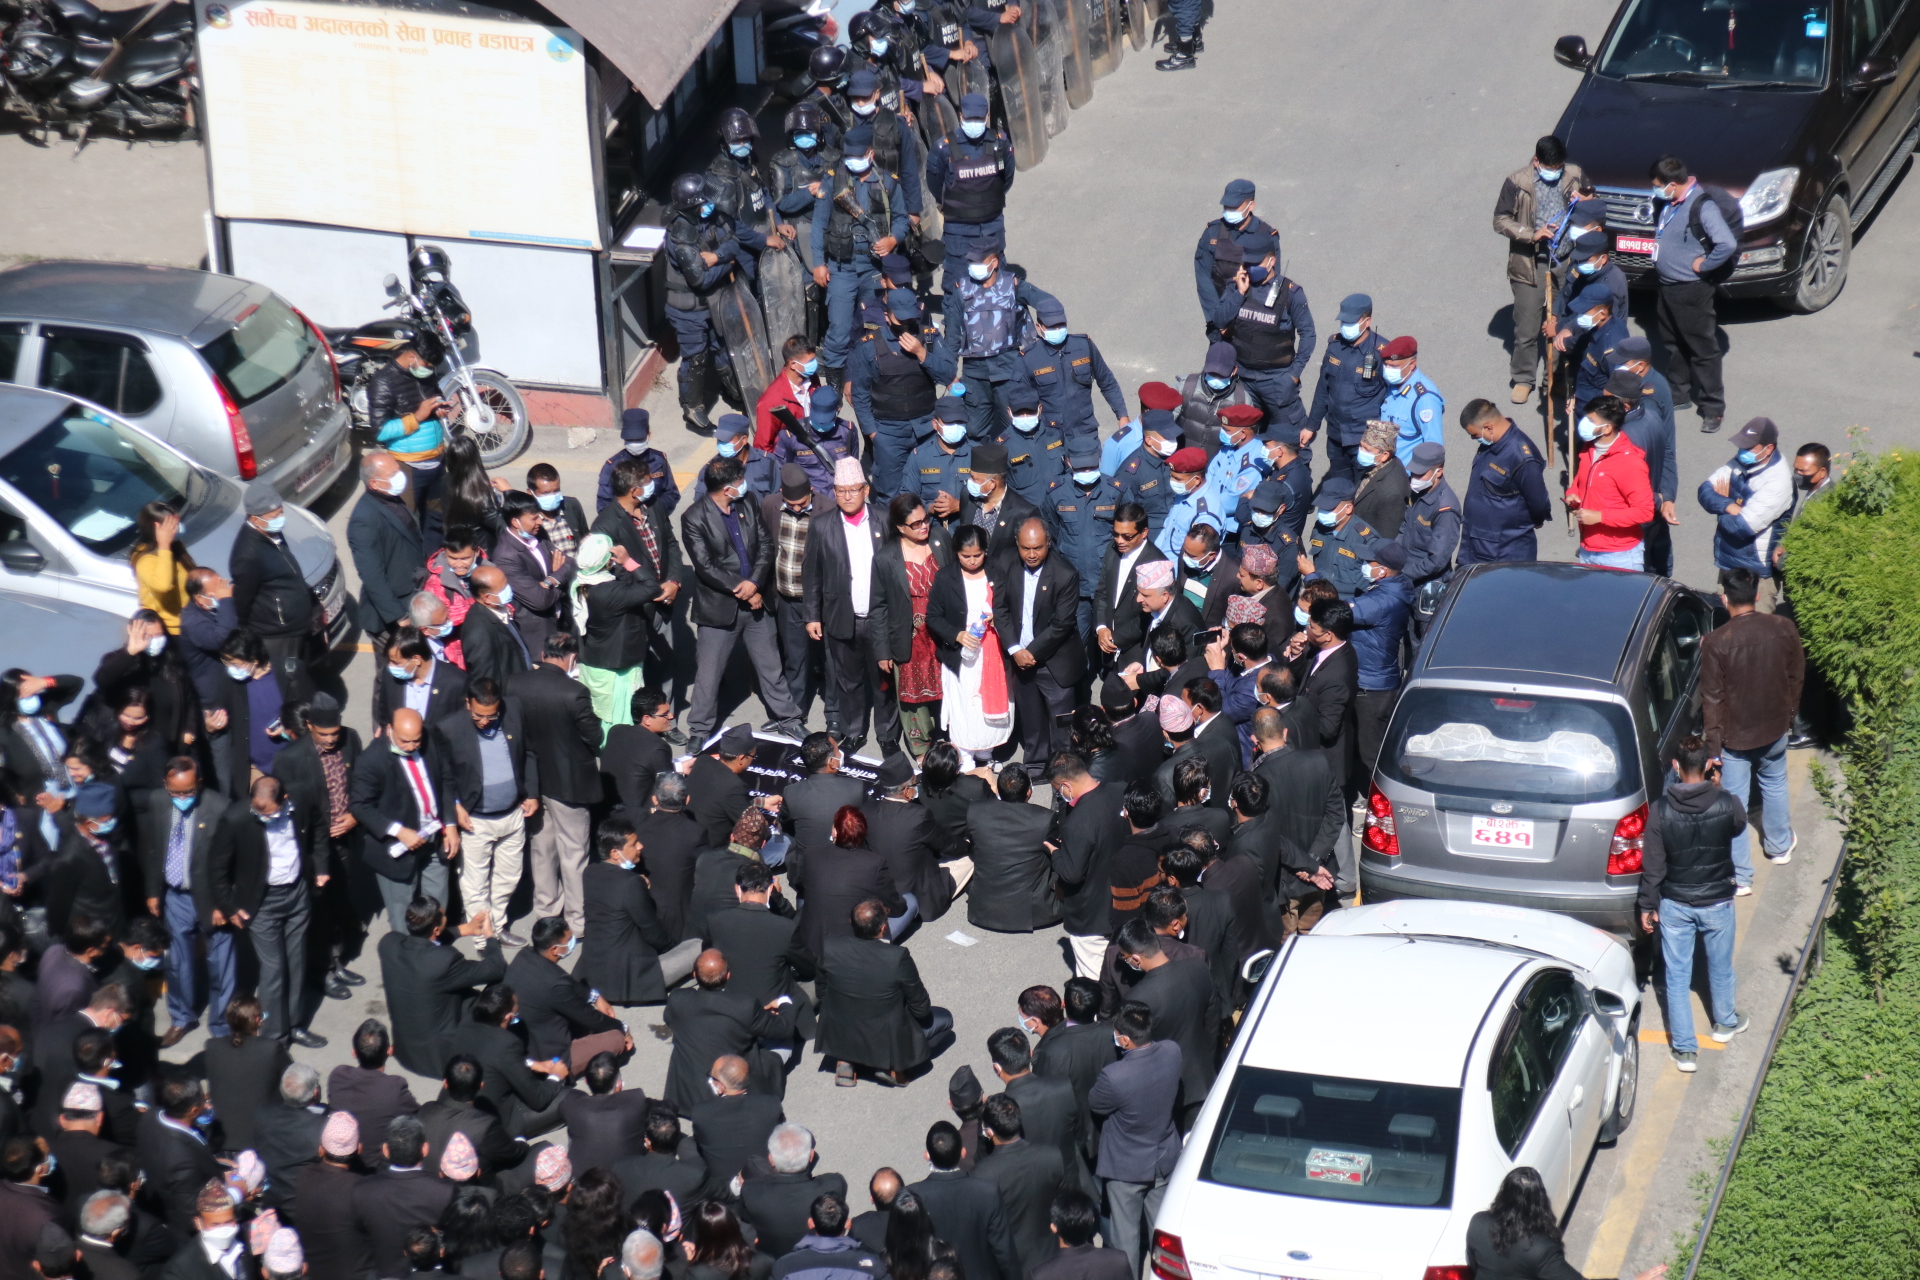 Police interfere in lawyers’ protest in Supreme Court (With photos)